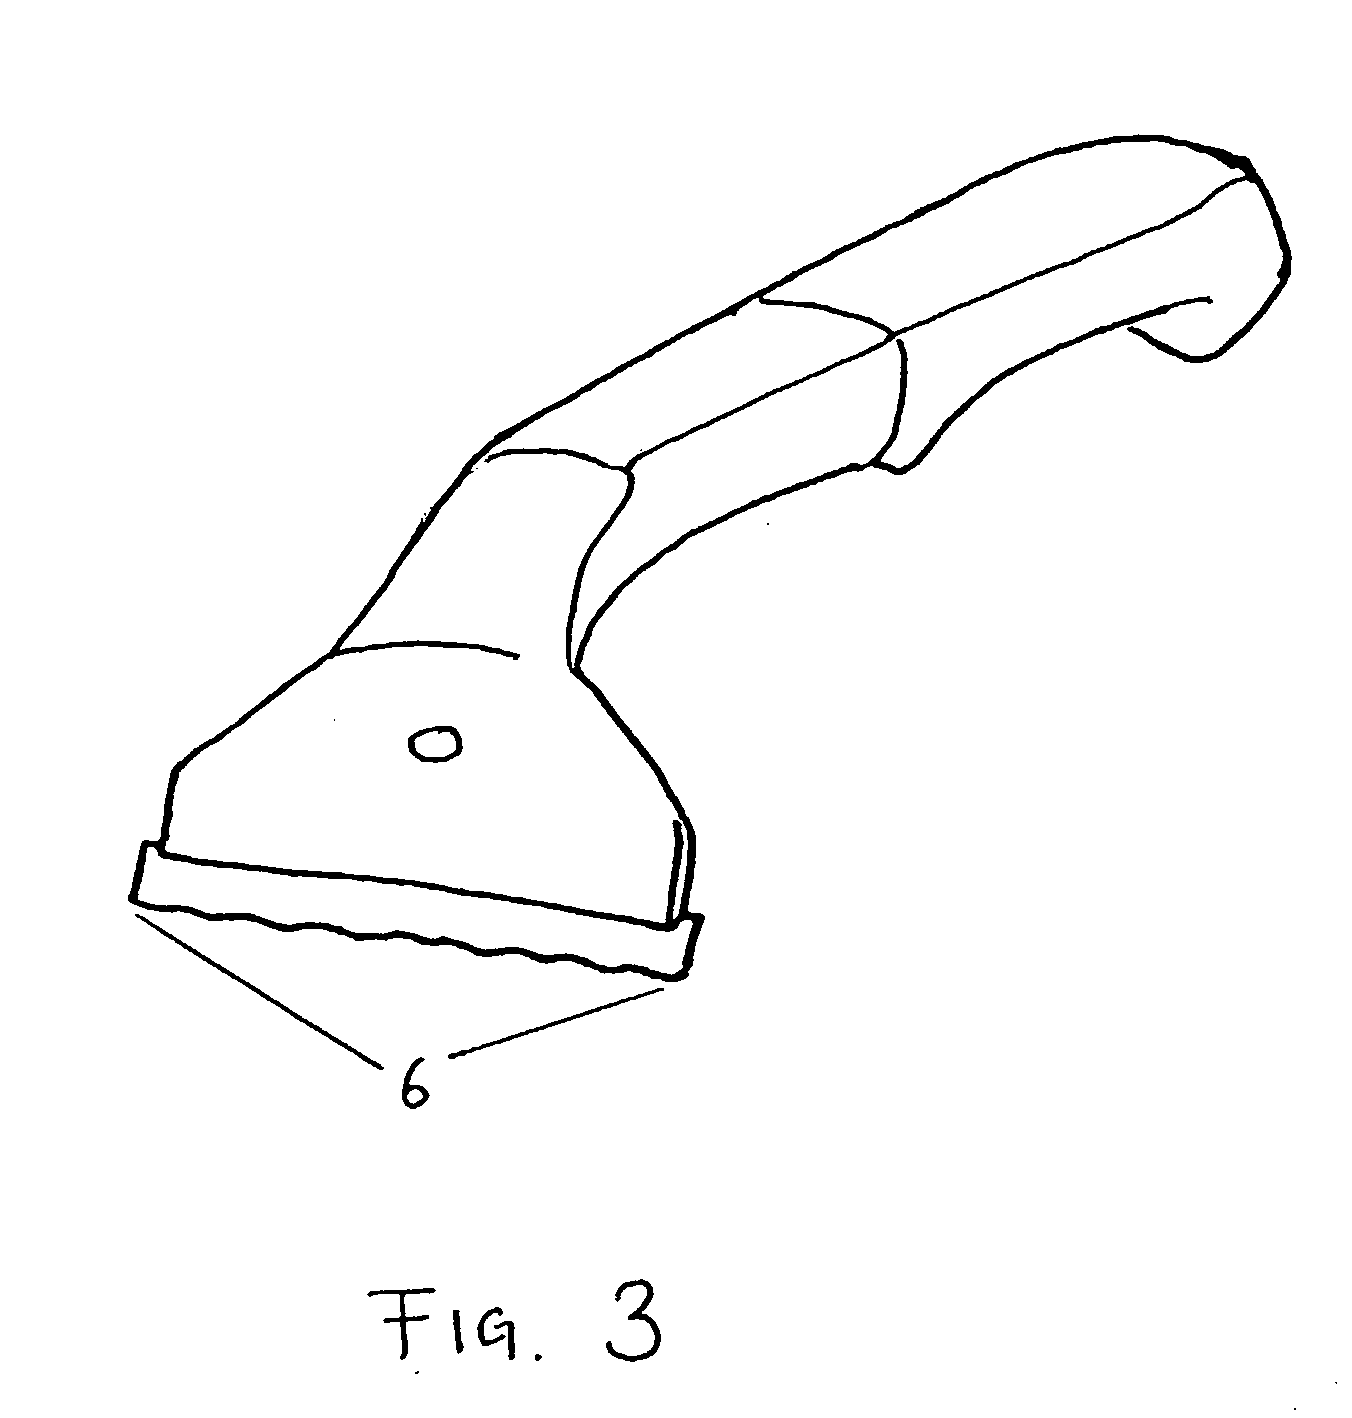 Scraping Blade For Paint Scraper Intended For Removing Paint